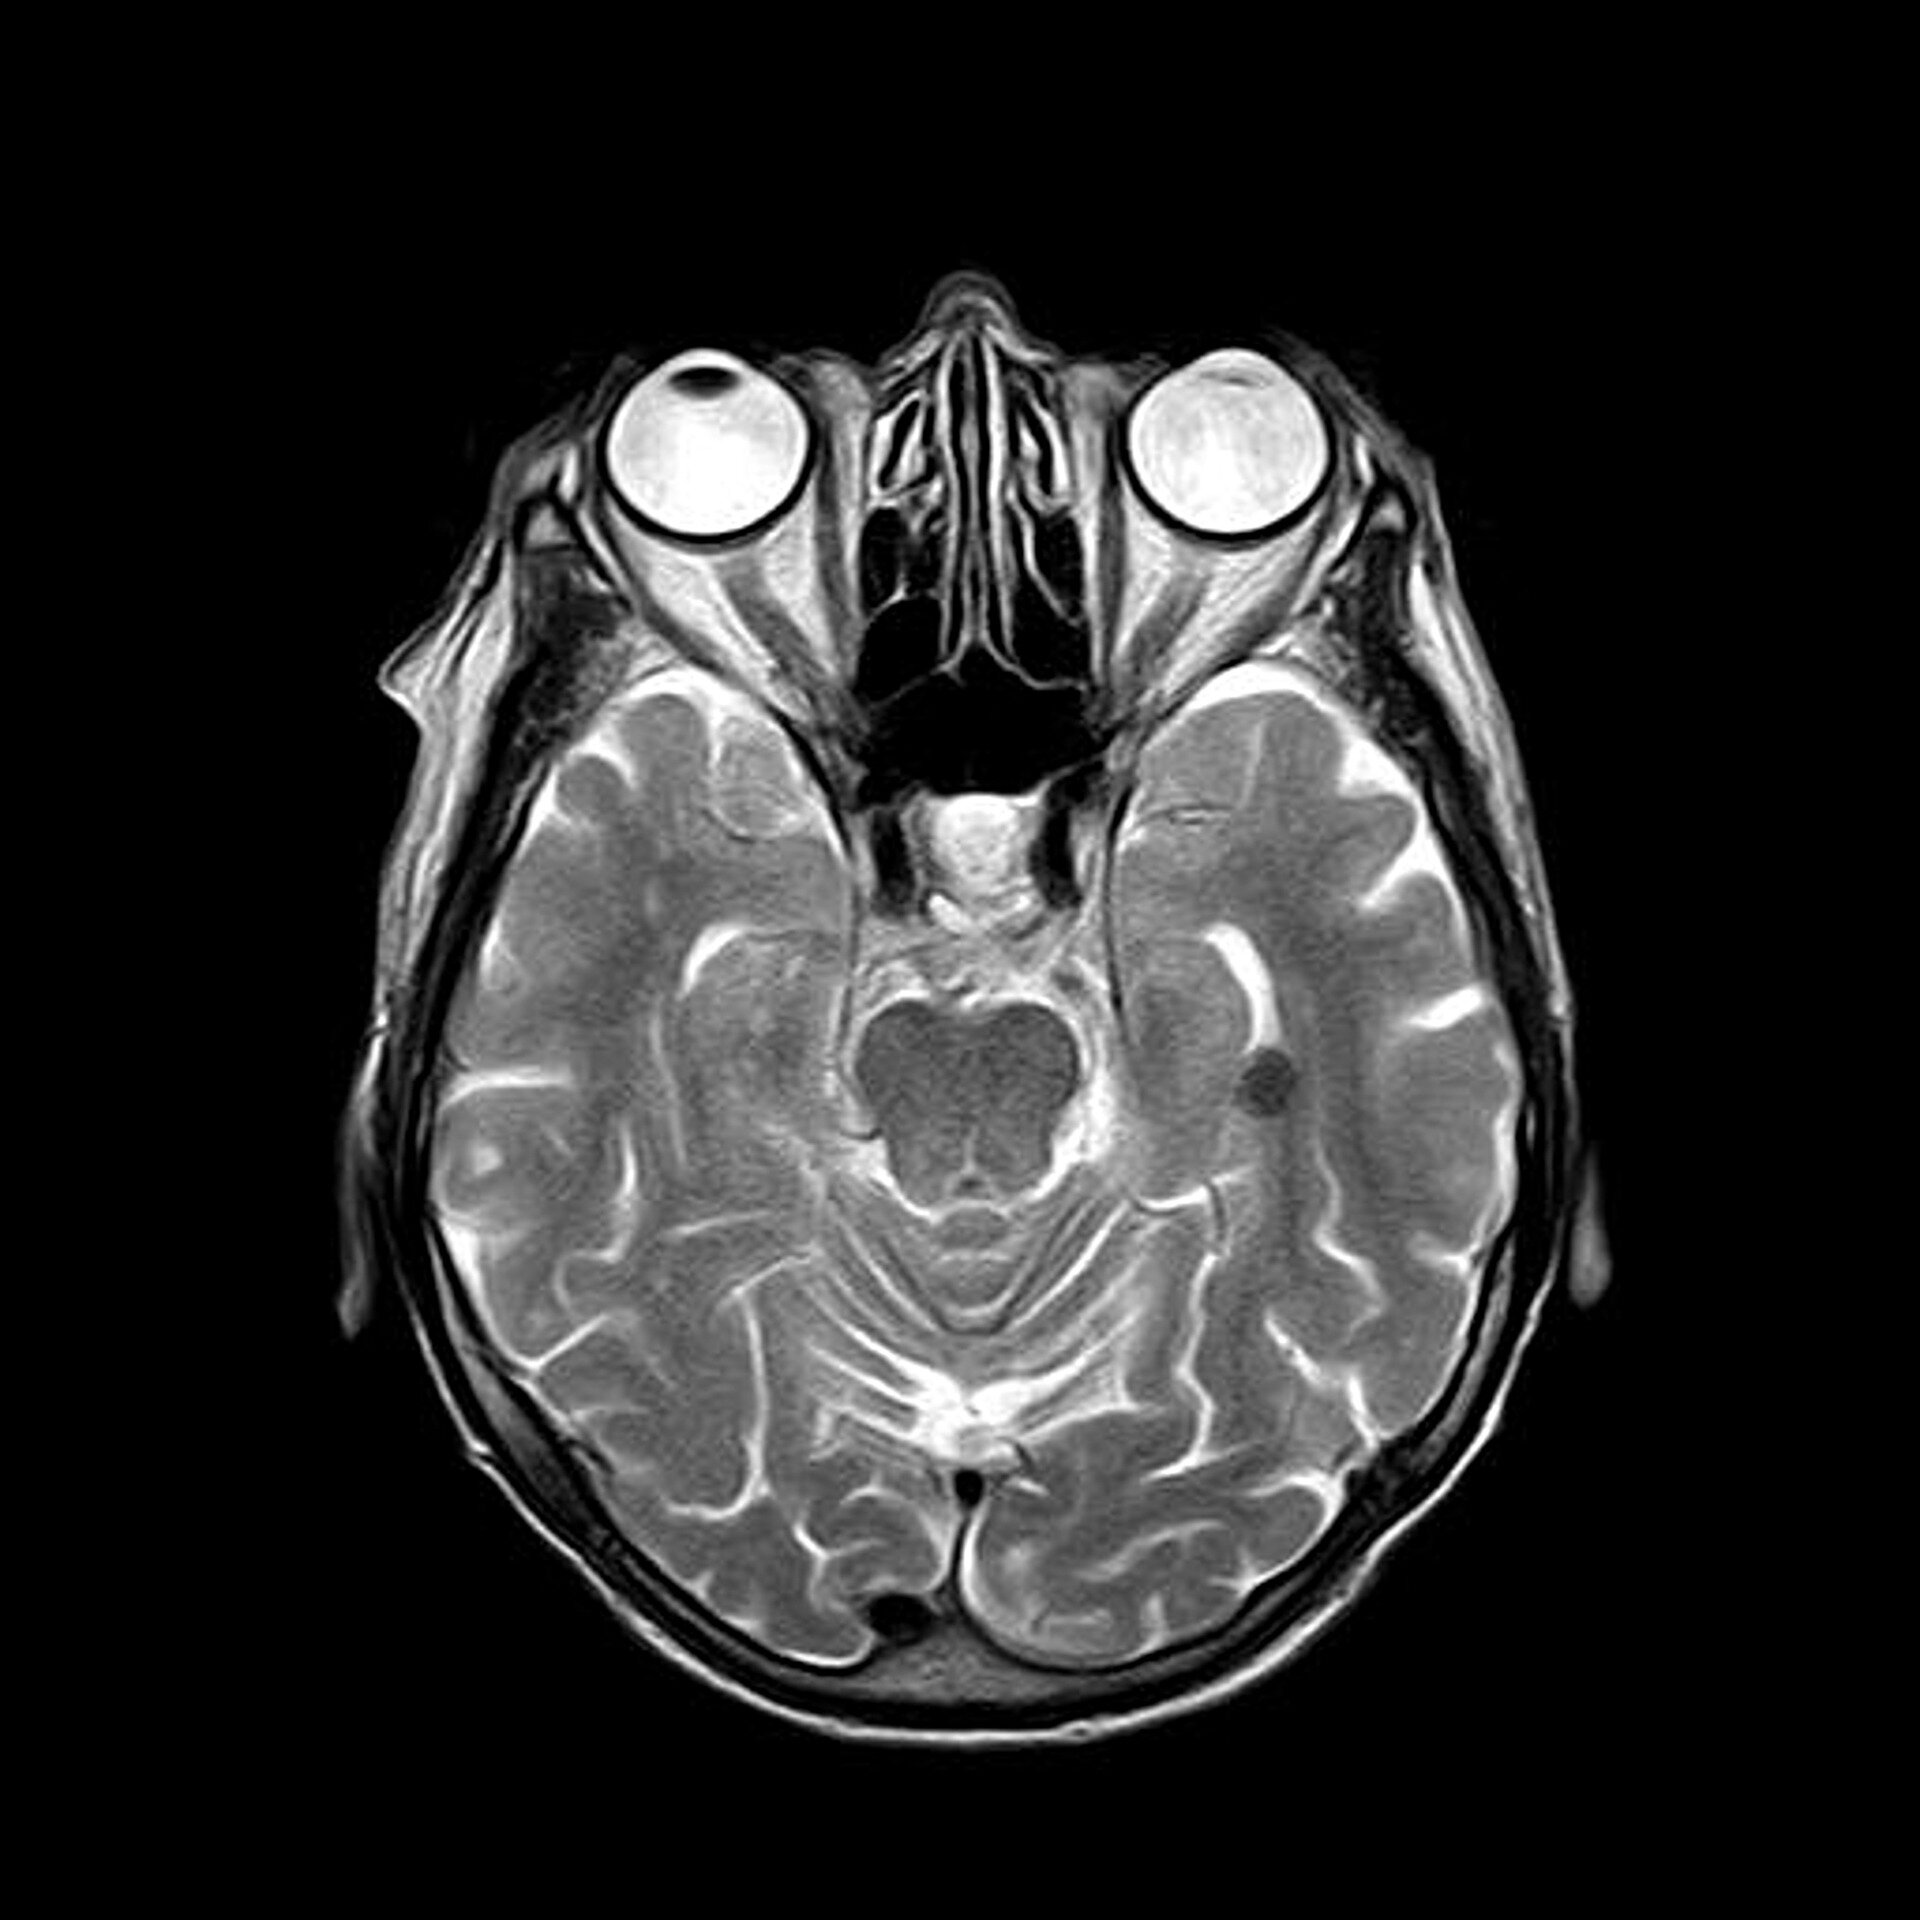 New MRI Technique Can Detect Early Dysfunction Of The Blood Brain Barrier With Small Vessel Disease